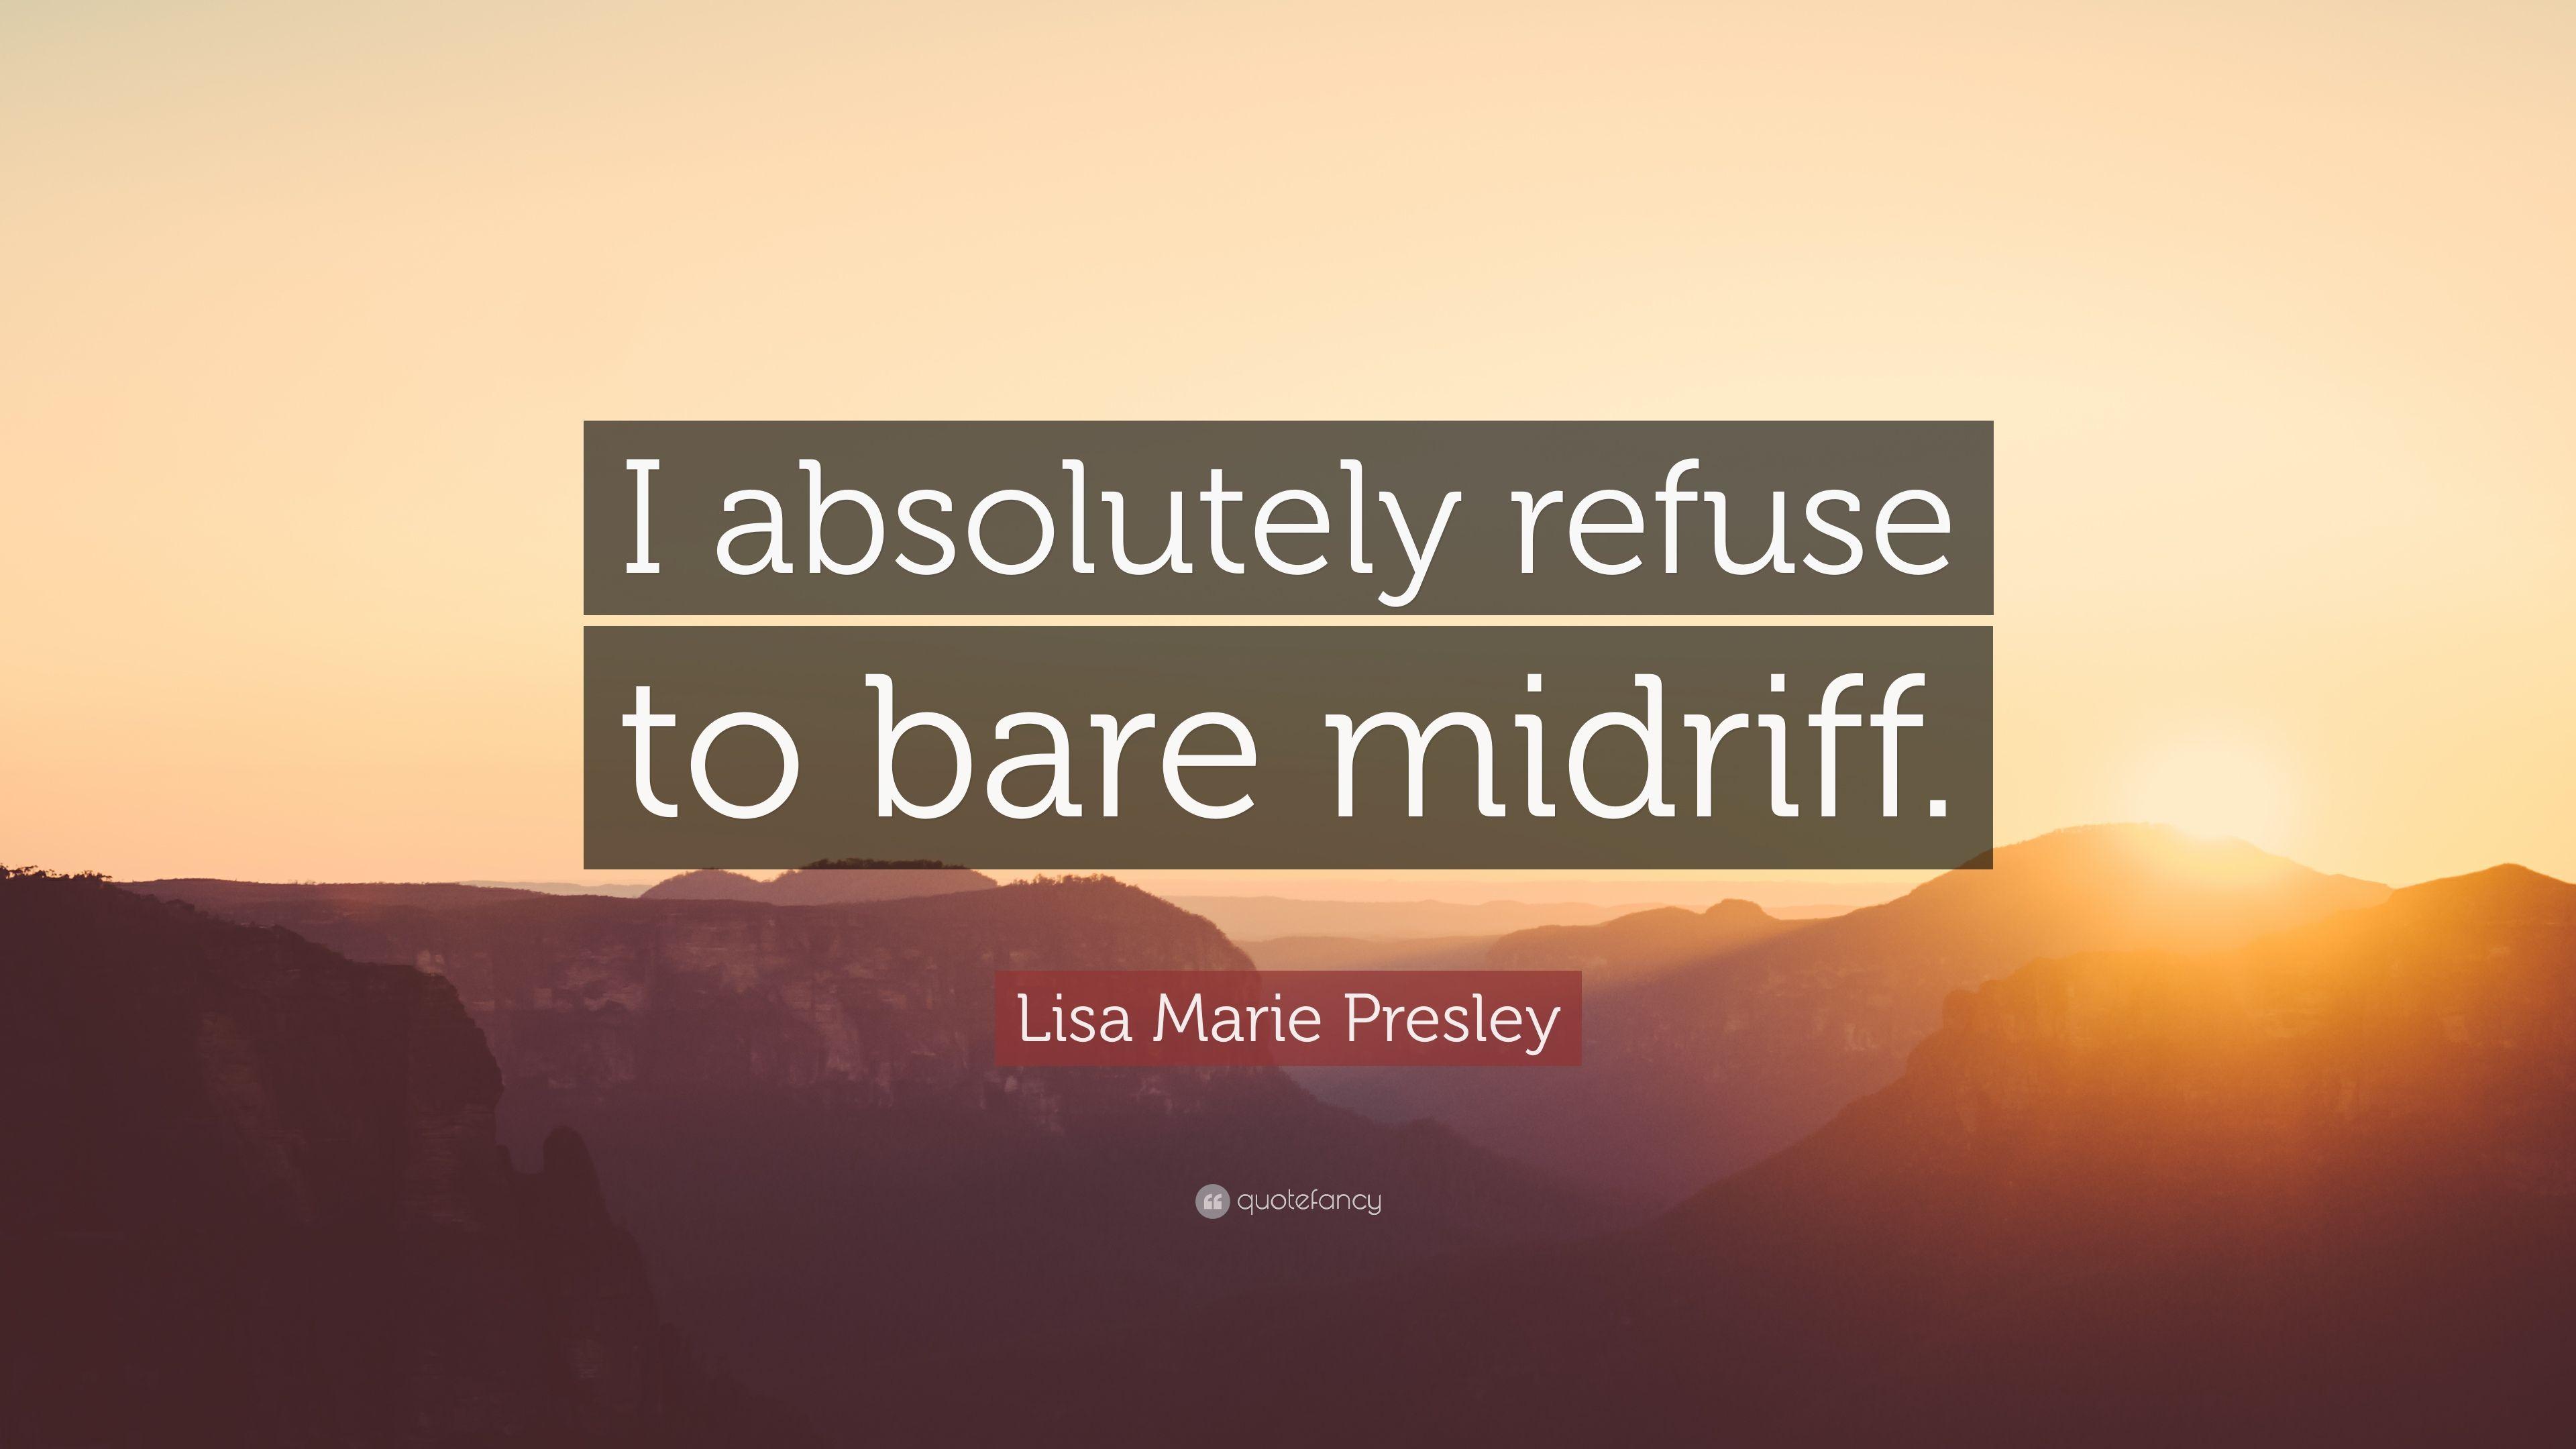 Lisa Marie Presley Quote: “I absolutely refuse to bare midriff.” 7